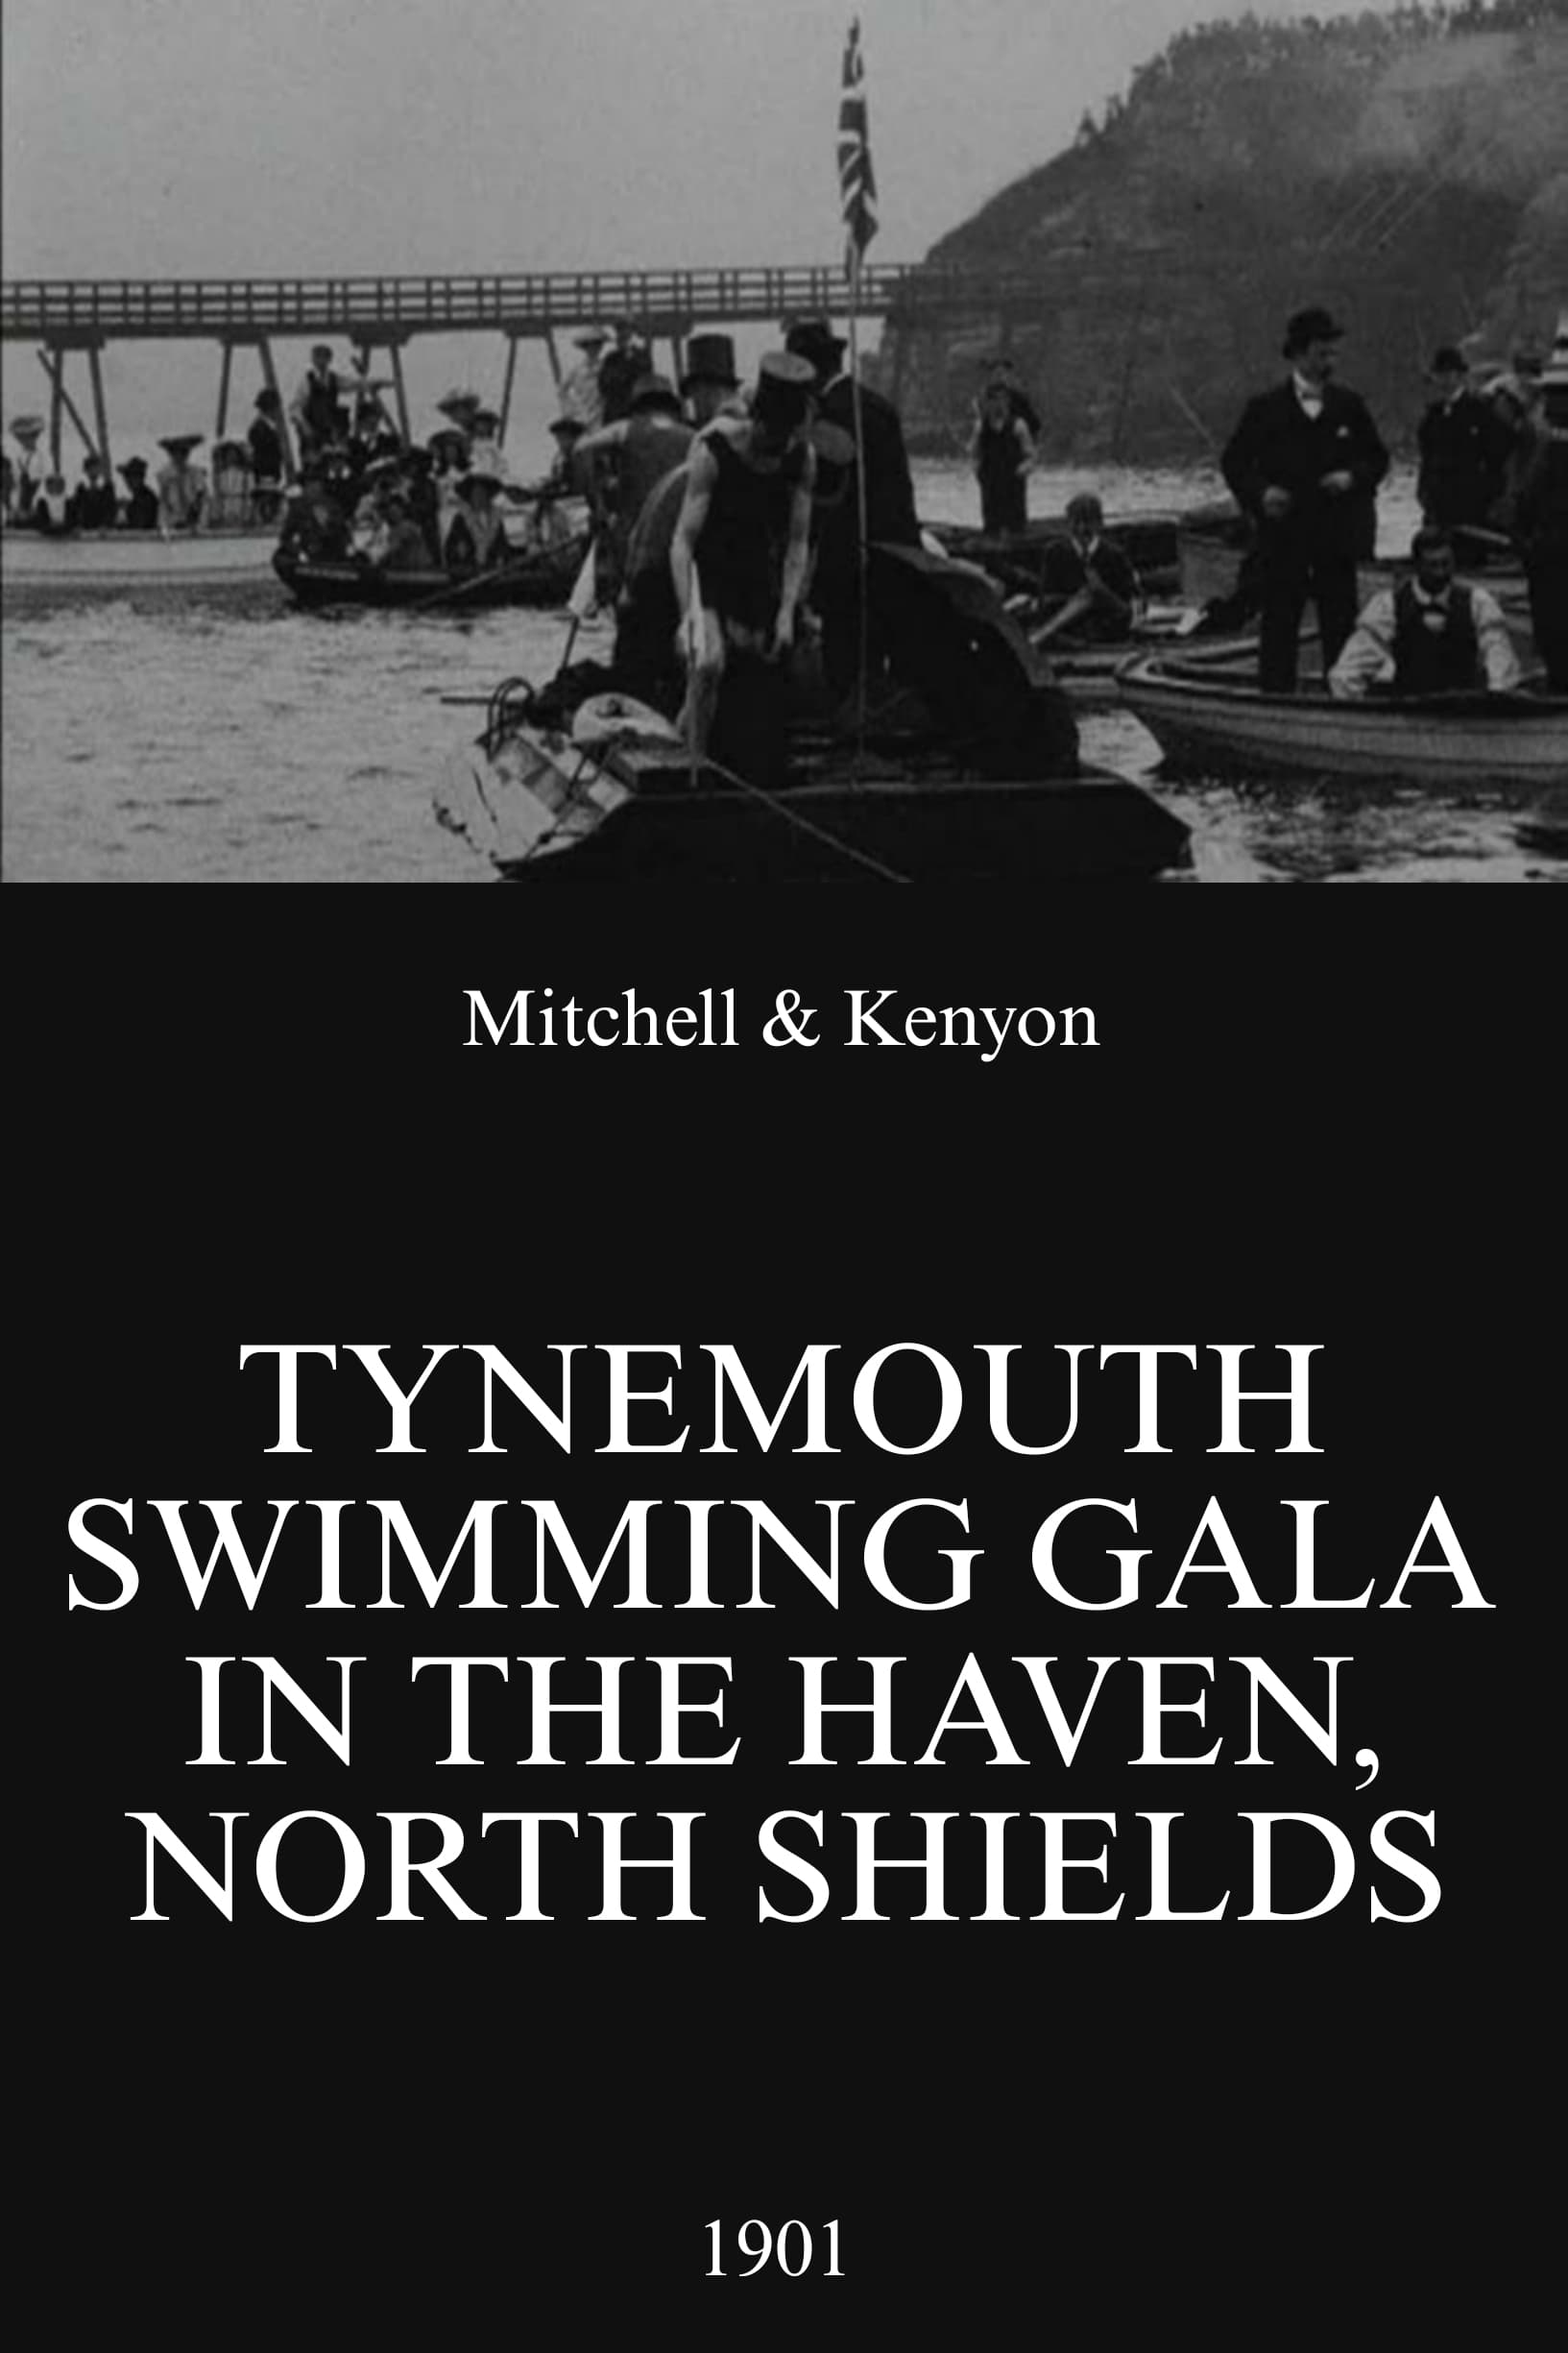 Tynemouth Swimming Gala in the Haven, North Shields